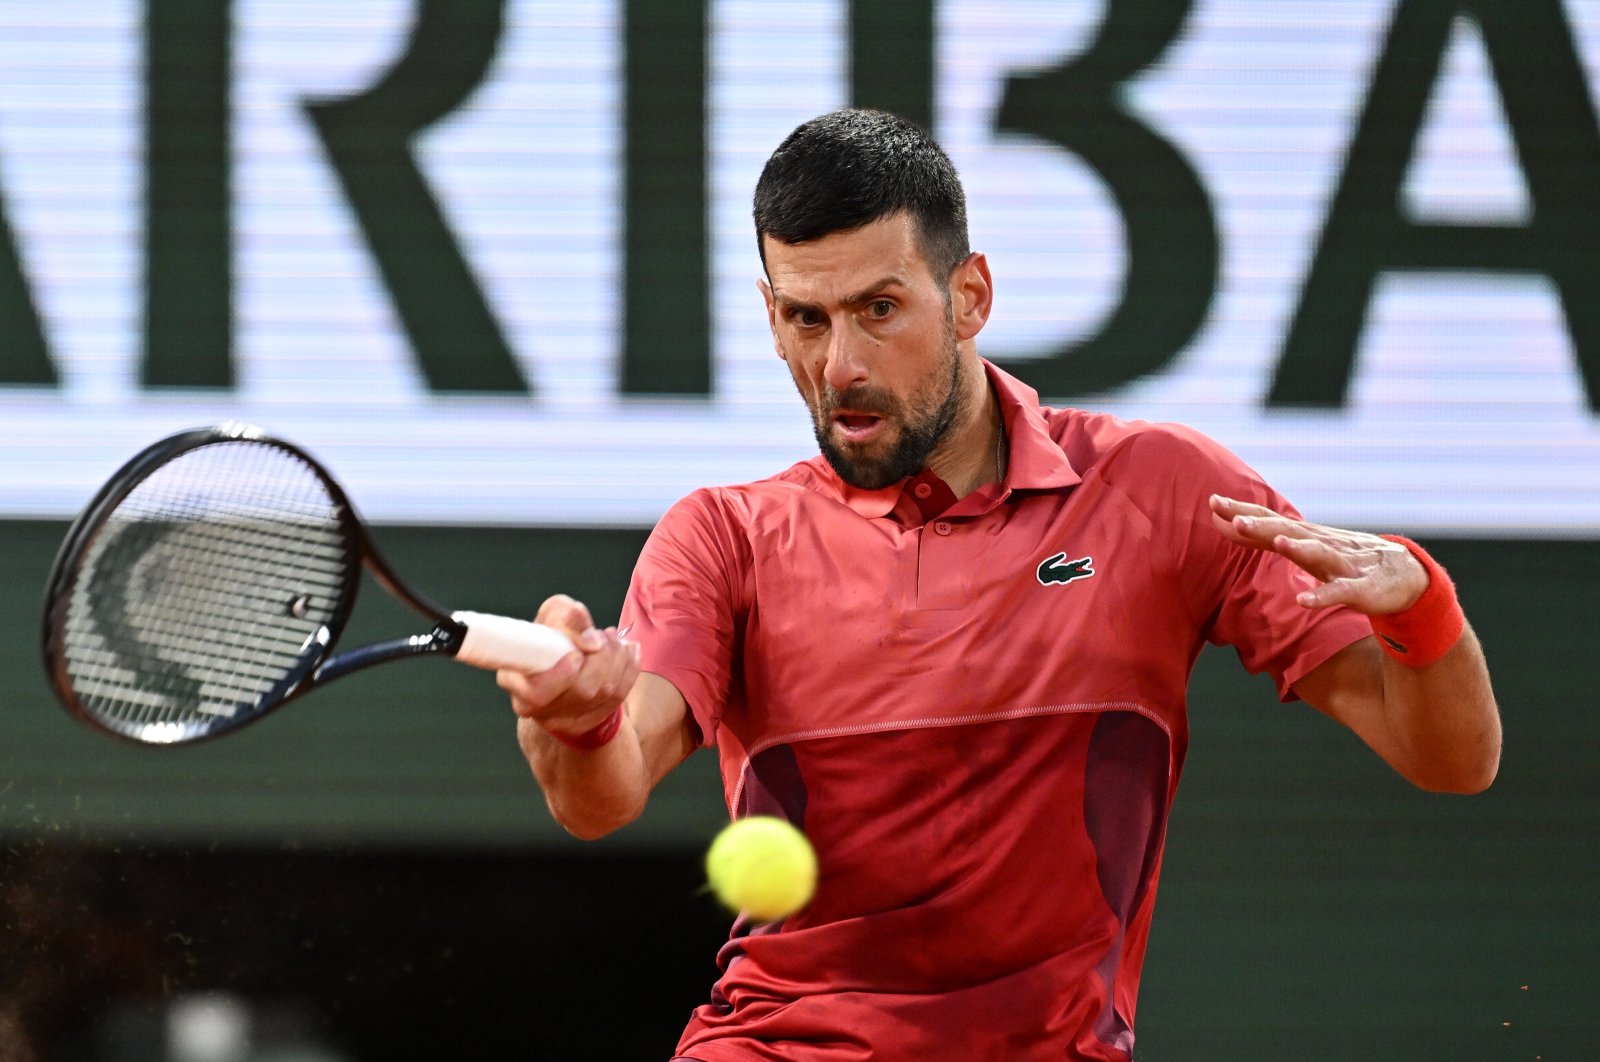 Djokovic scrapes through French Open opener, faces tough road ahead